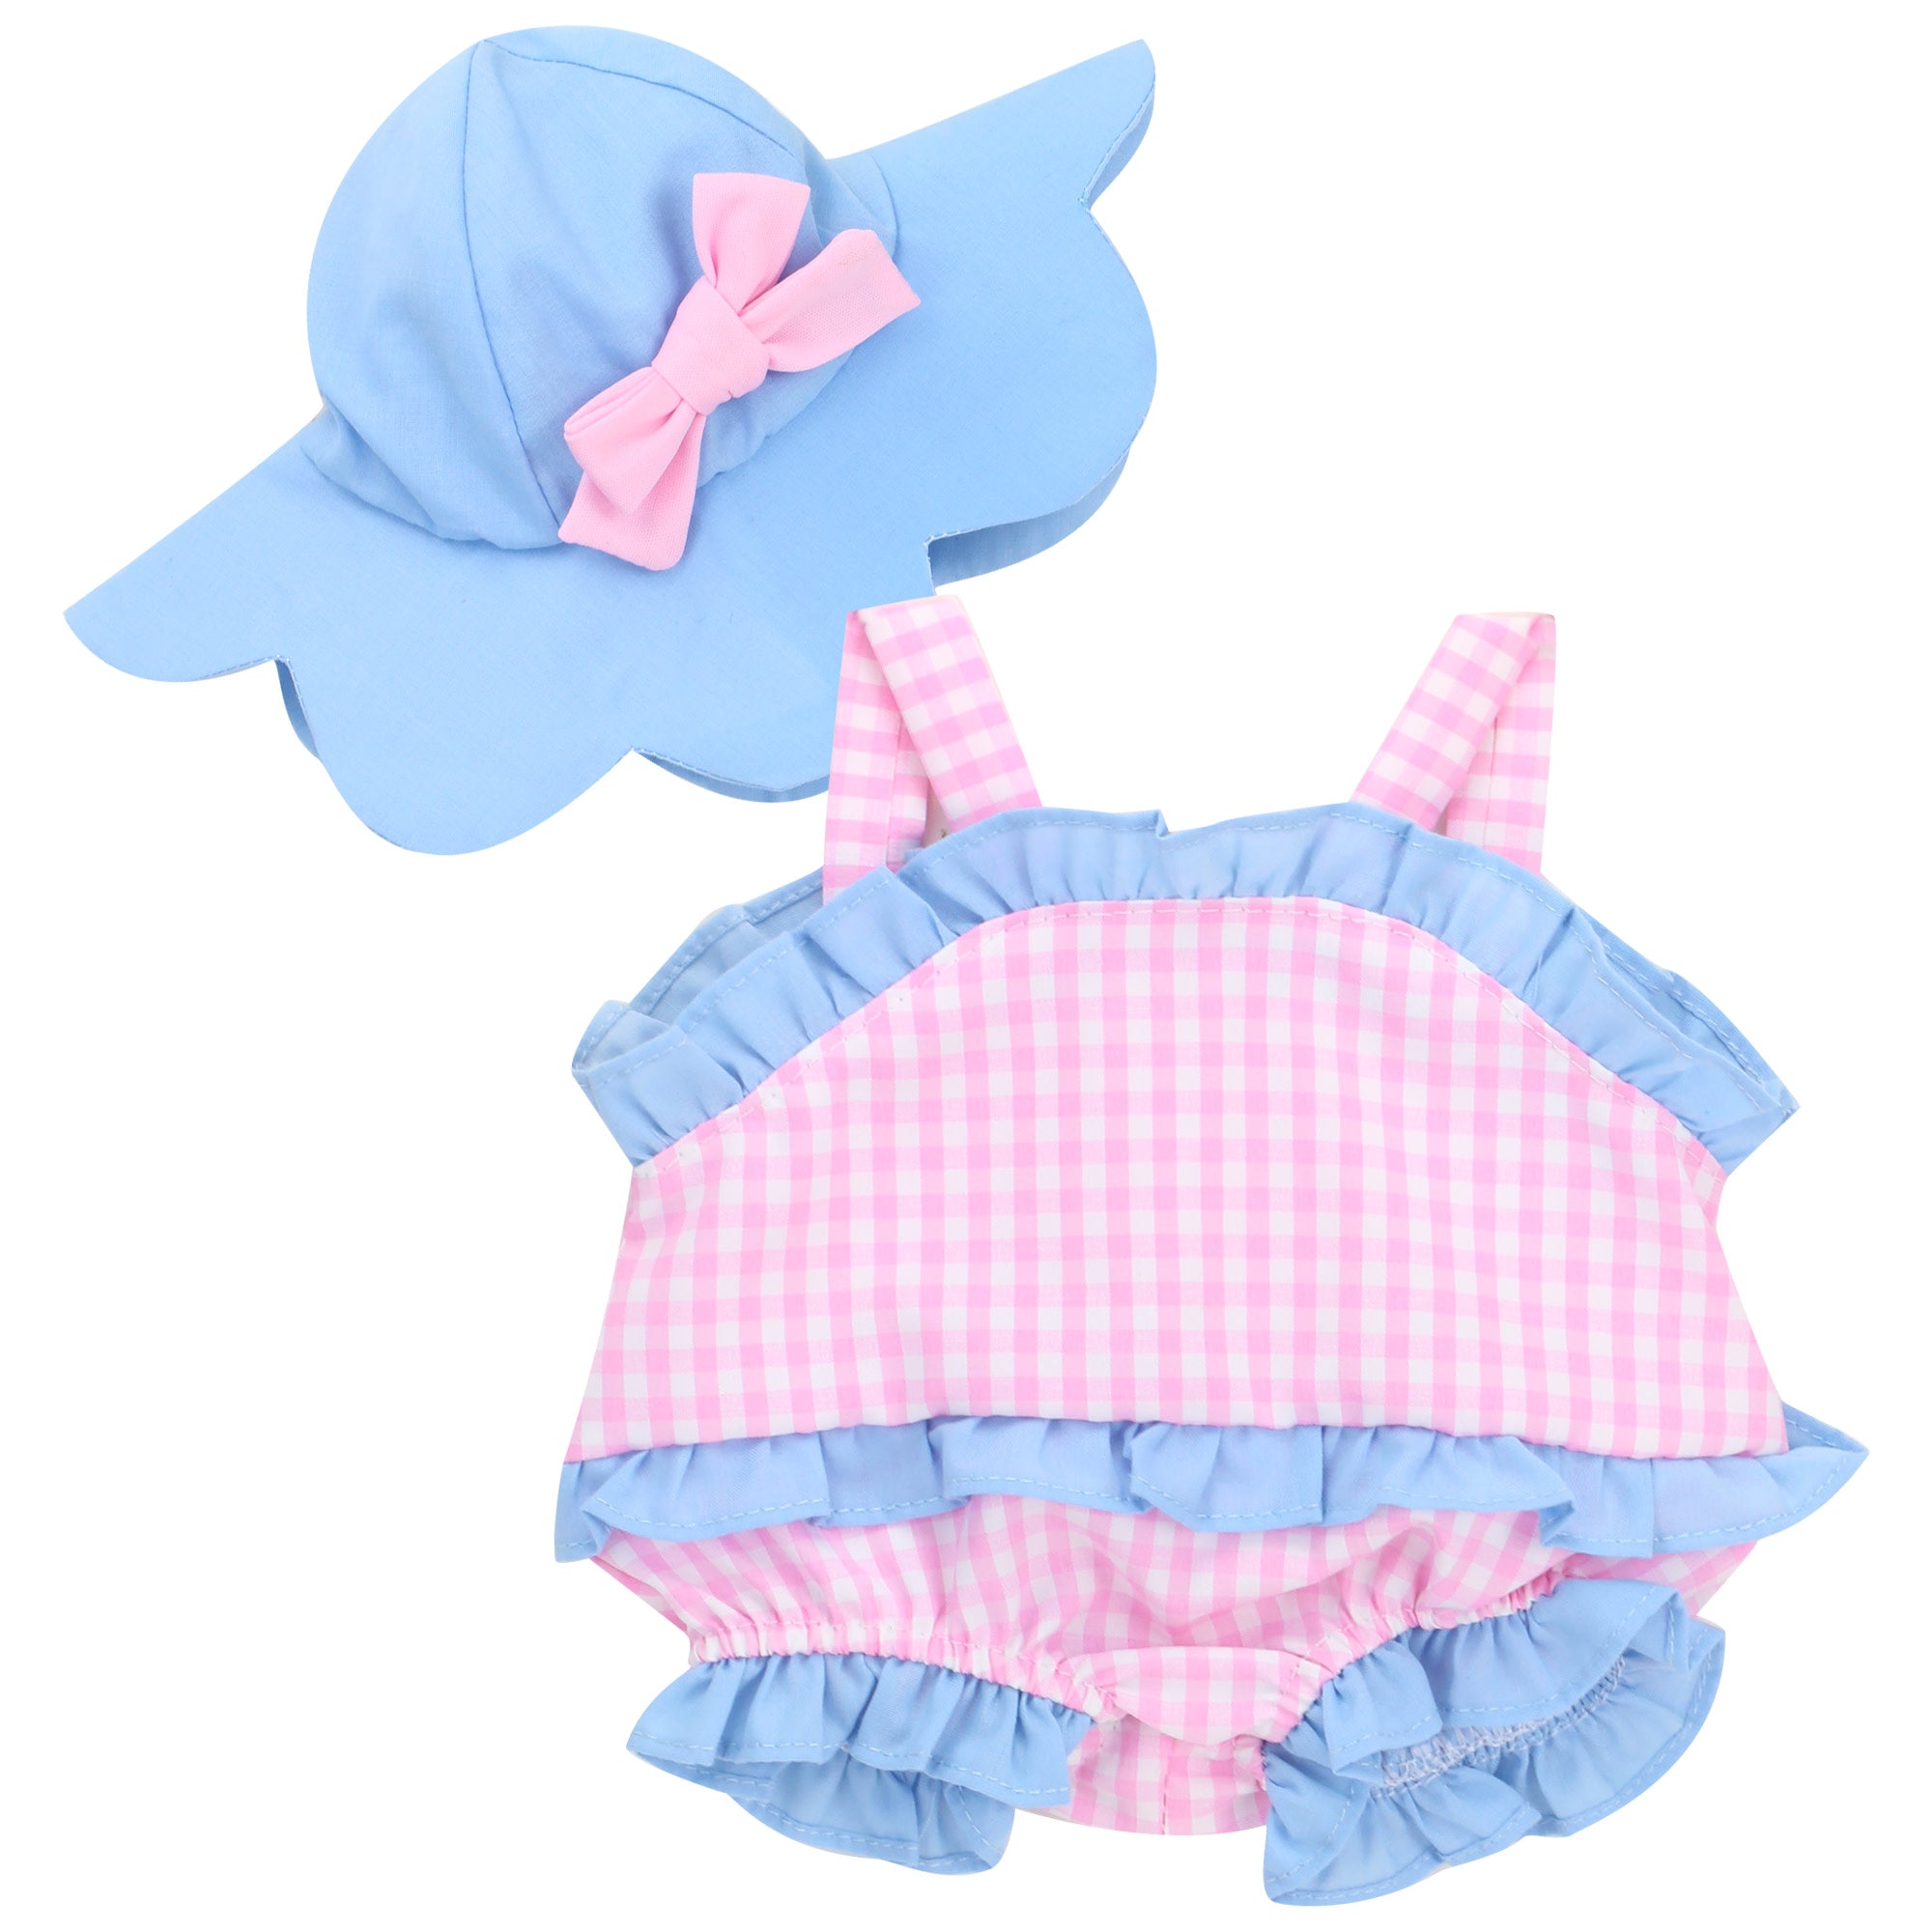 Sophia's Gingham Romper Outfit and Hat Set for 15'' Dolls, Pink/Blue